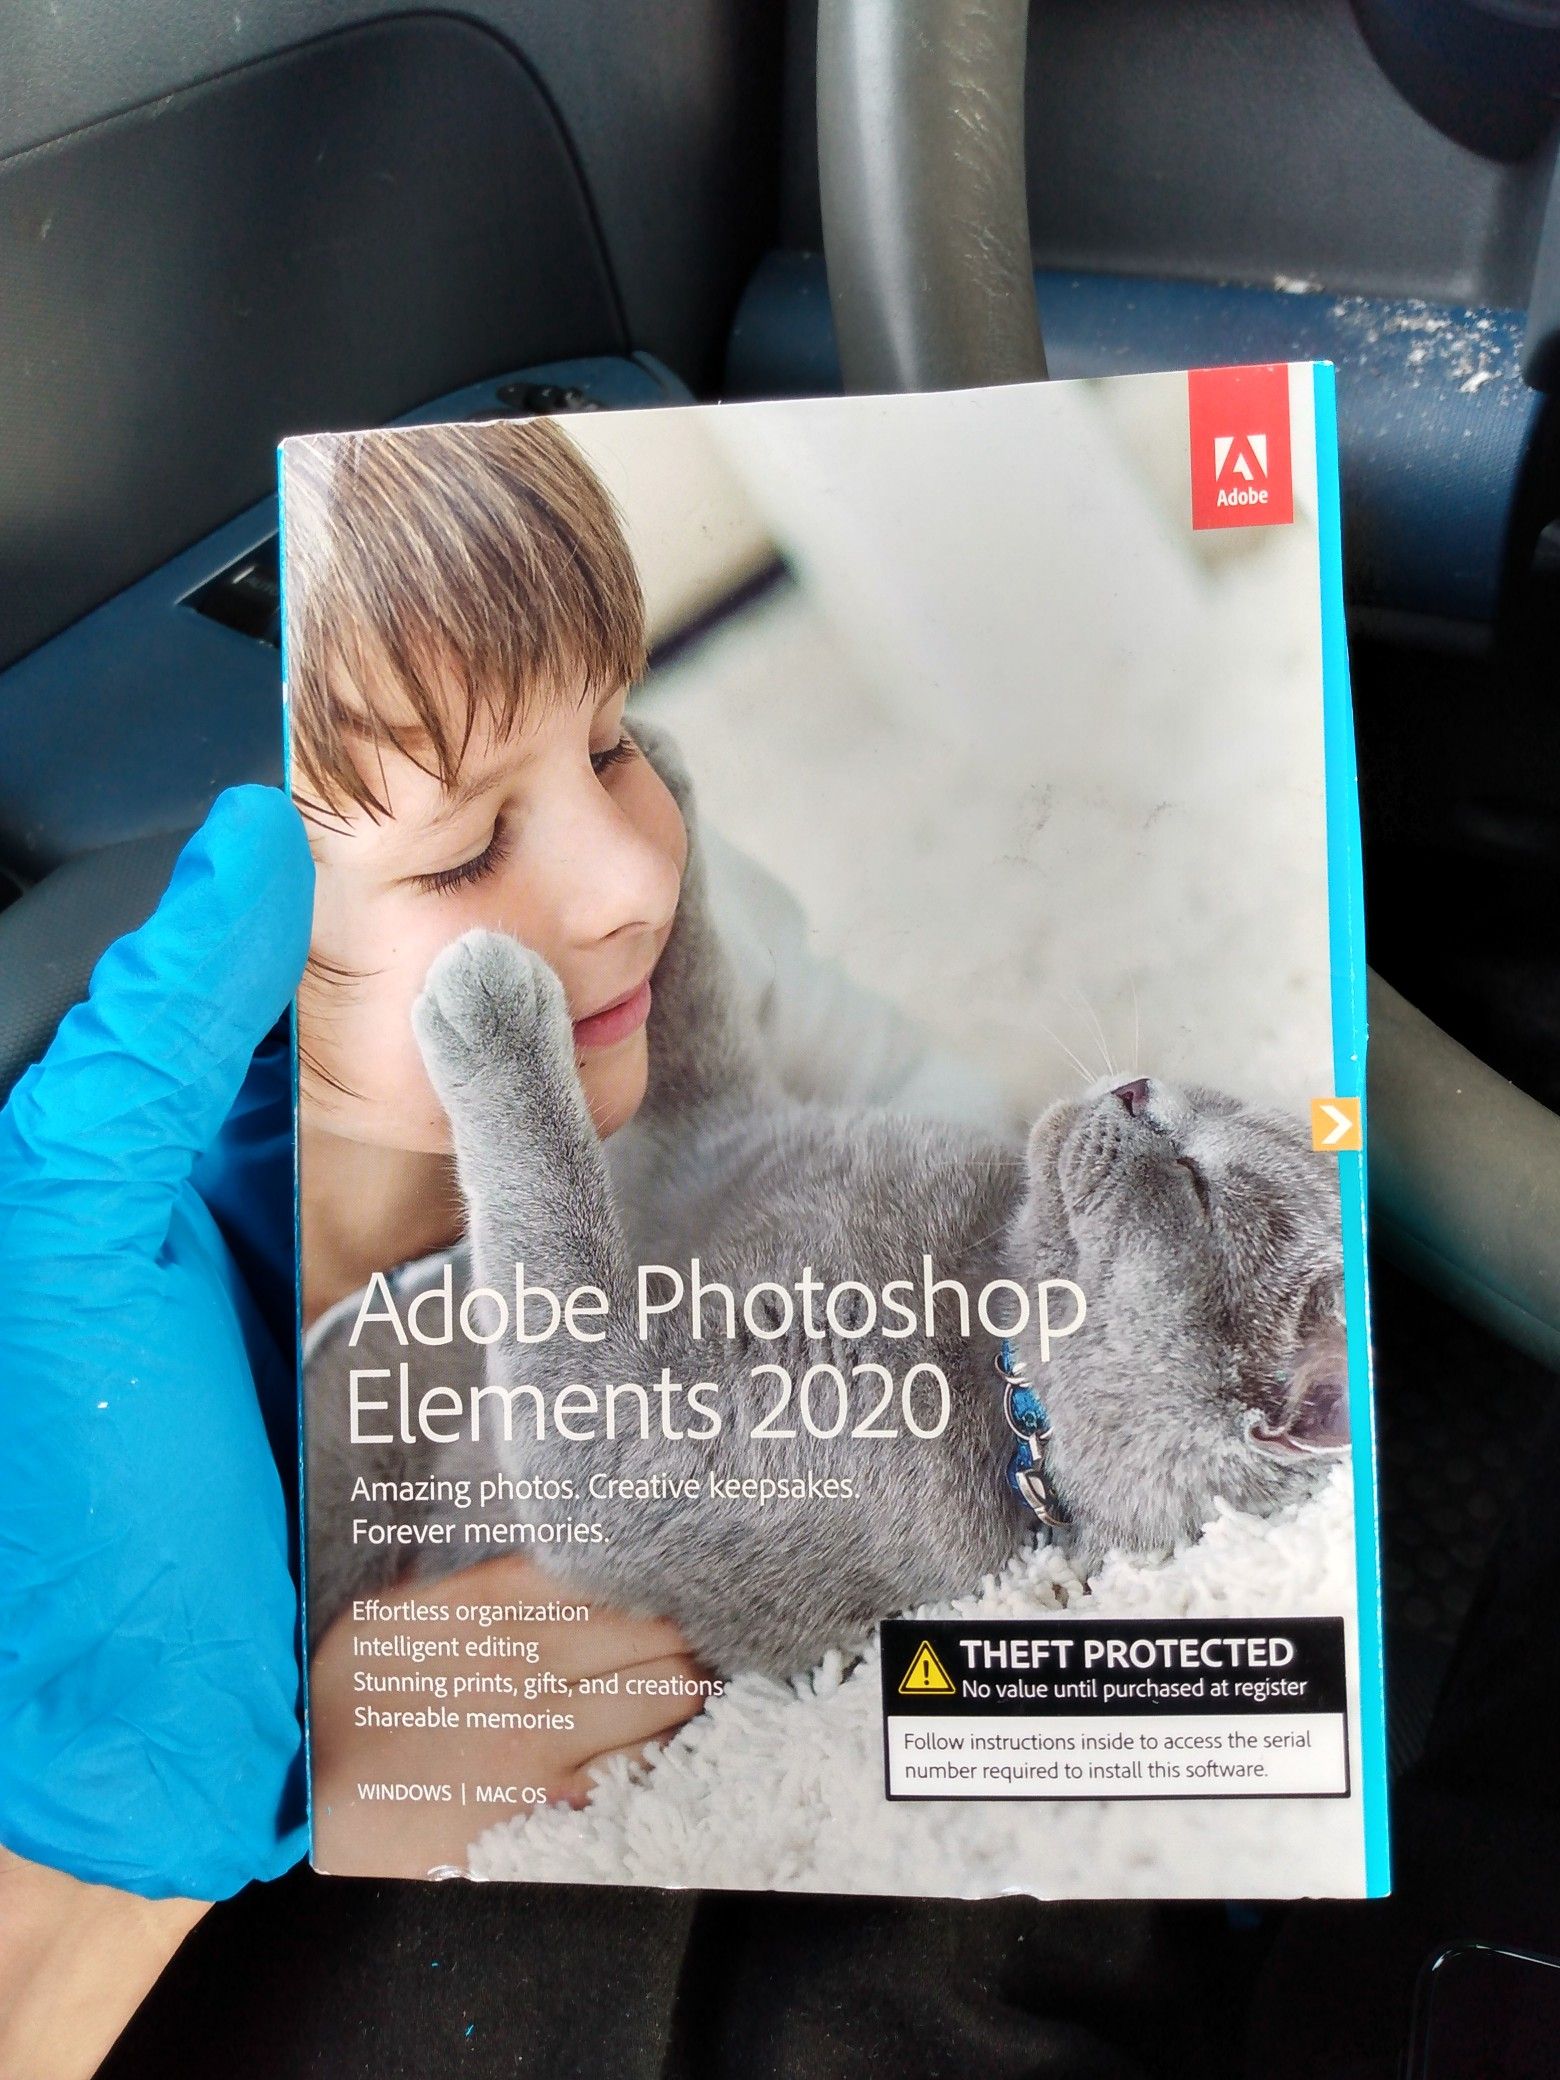 New Adobe Photoshop software download